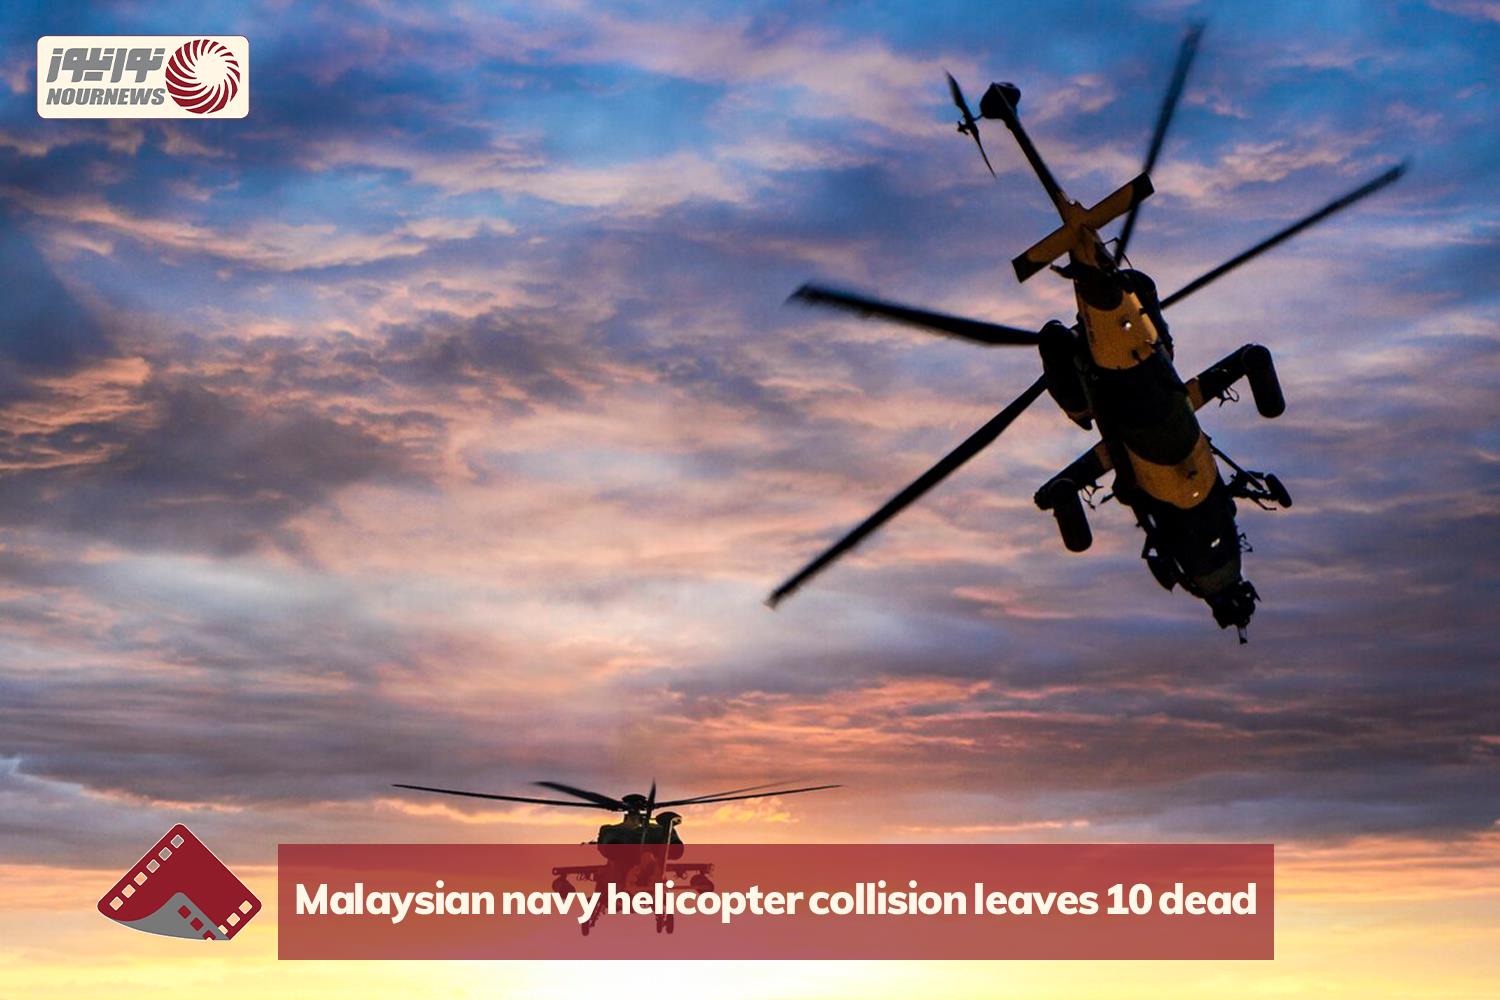 Malaysian navy helicopter collision leaves 10 dead